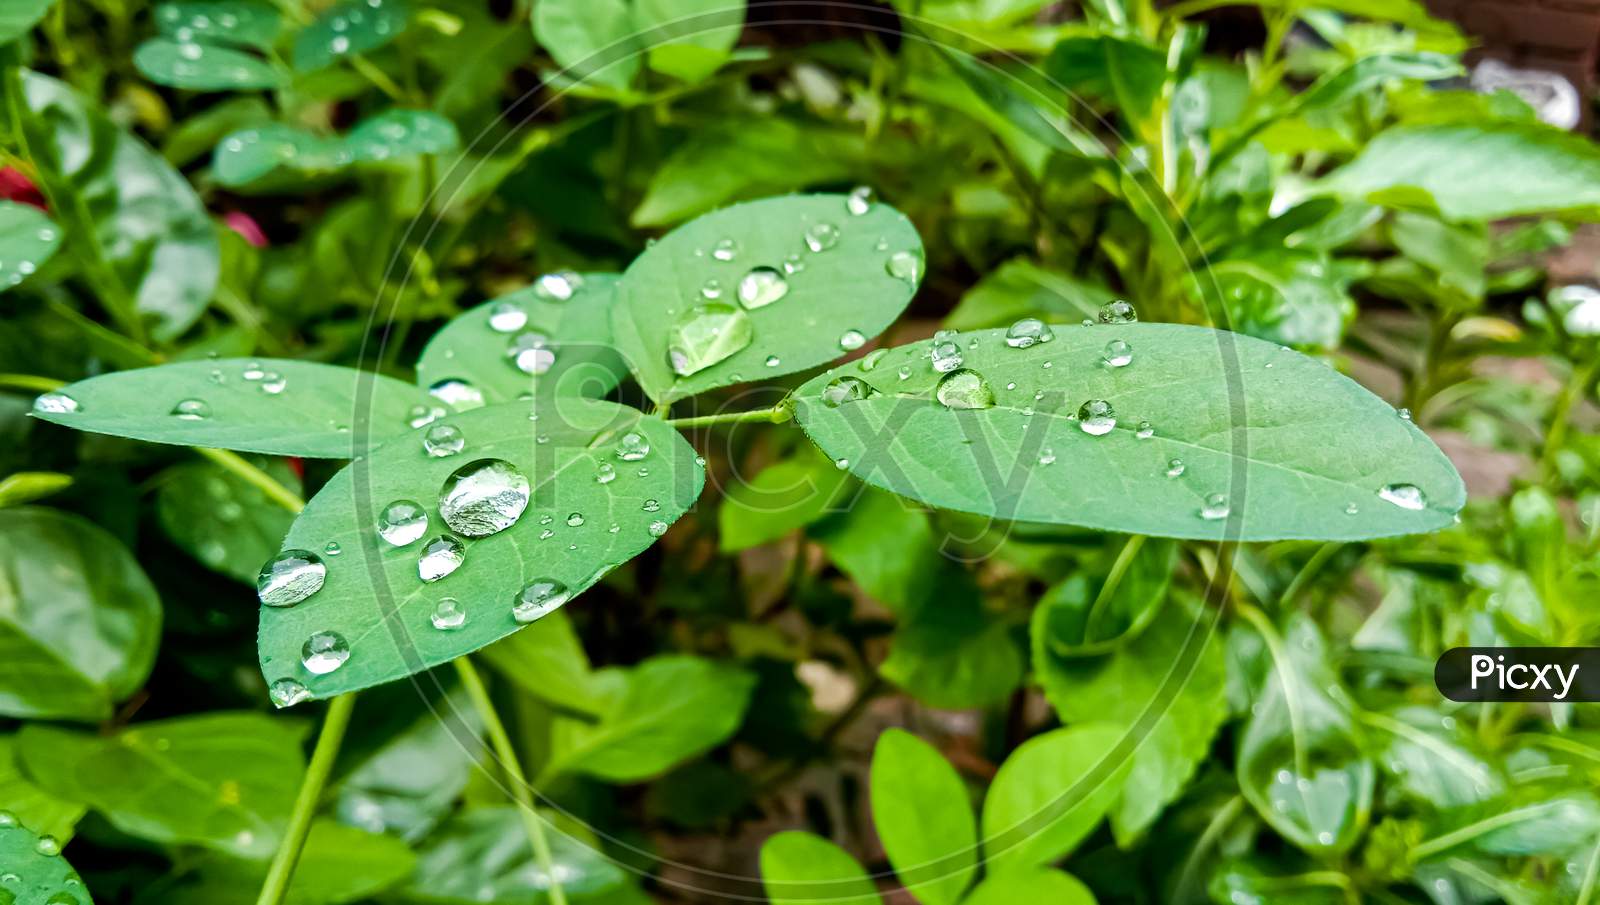 An  Asian pigeon wings ( blue pea ) plant in a garden and water droplets on it's leaves.